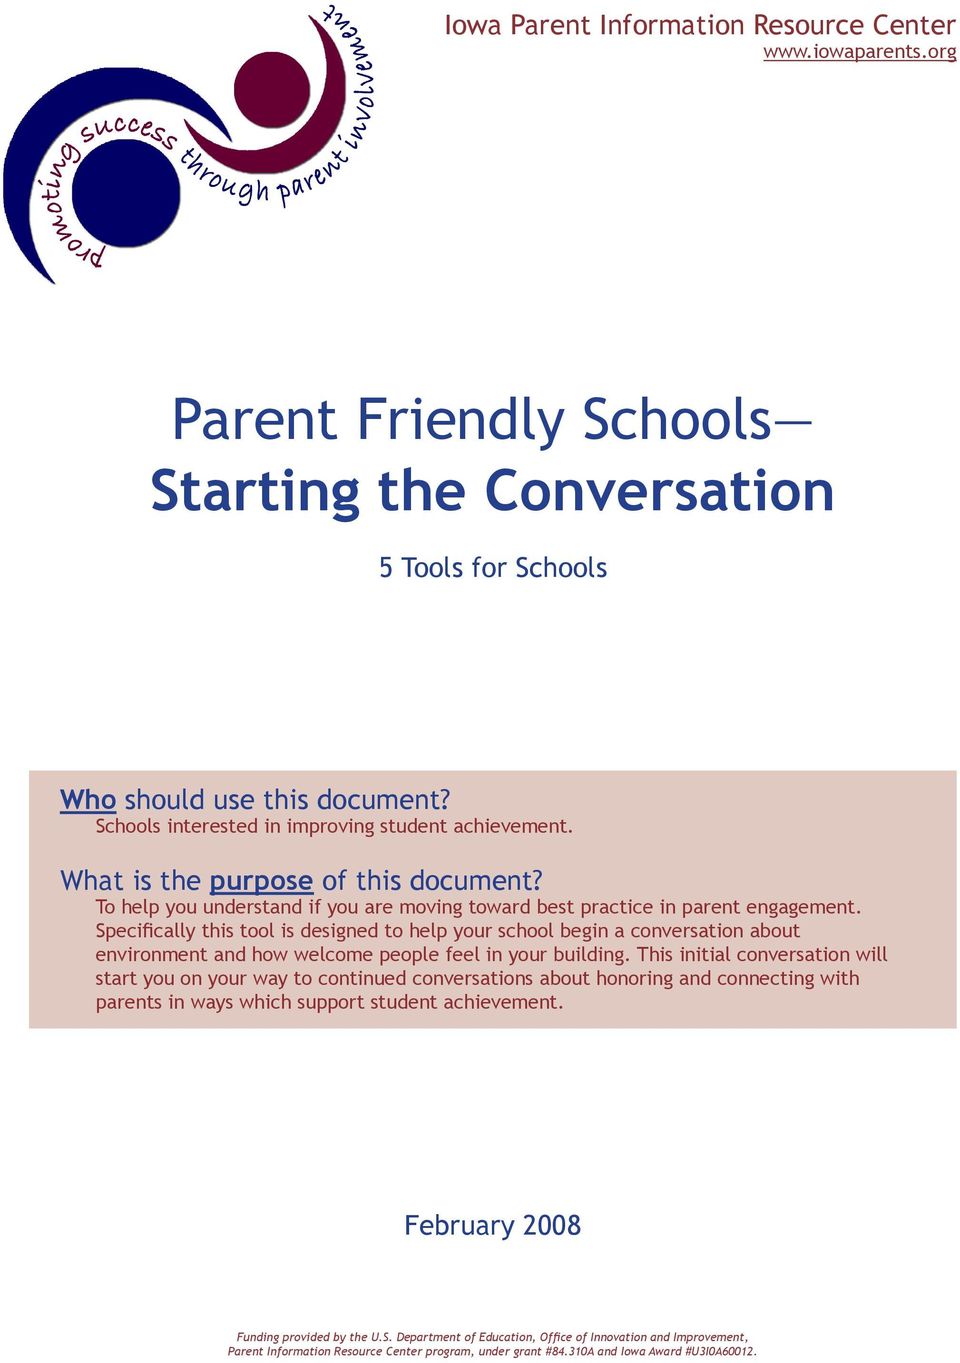 To help you understand if you are moving toward best practice in parent engagement.